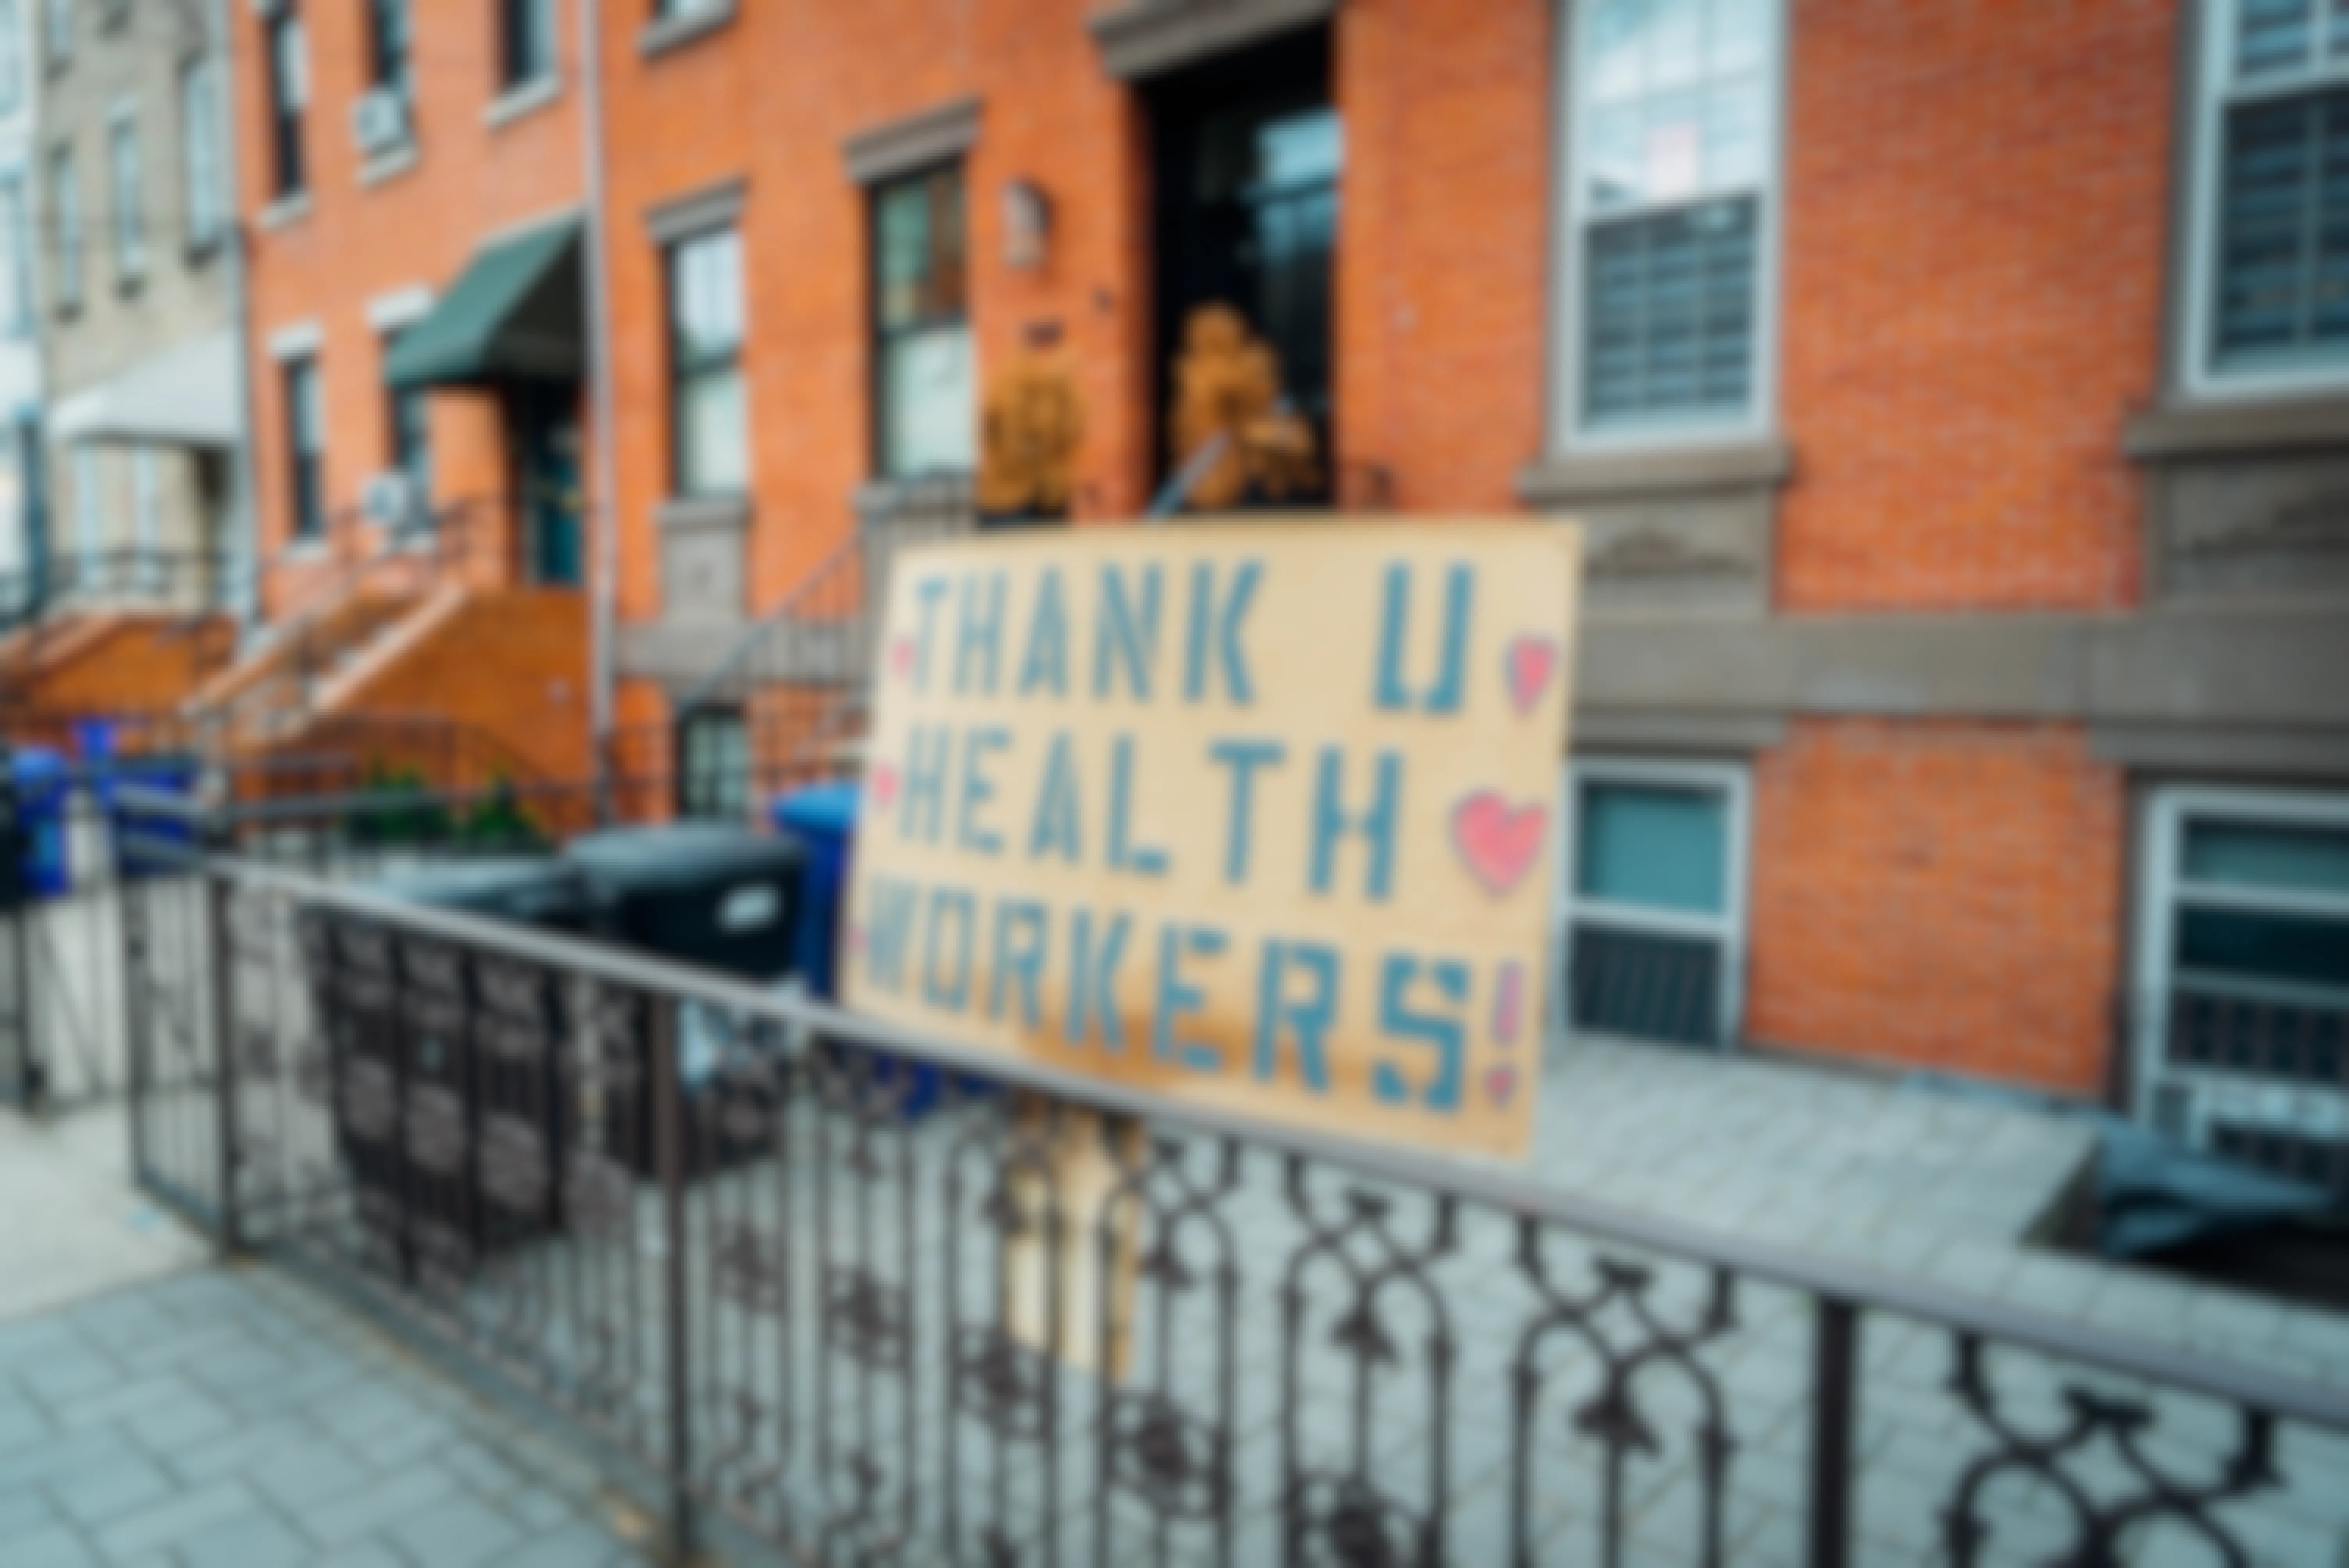 A "Thank U Health Workers" sign hung outside a city apartment building.